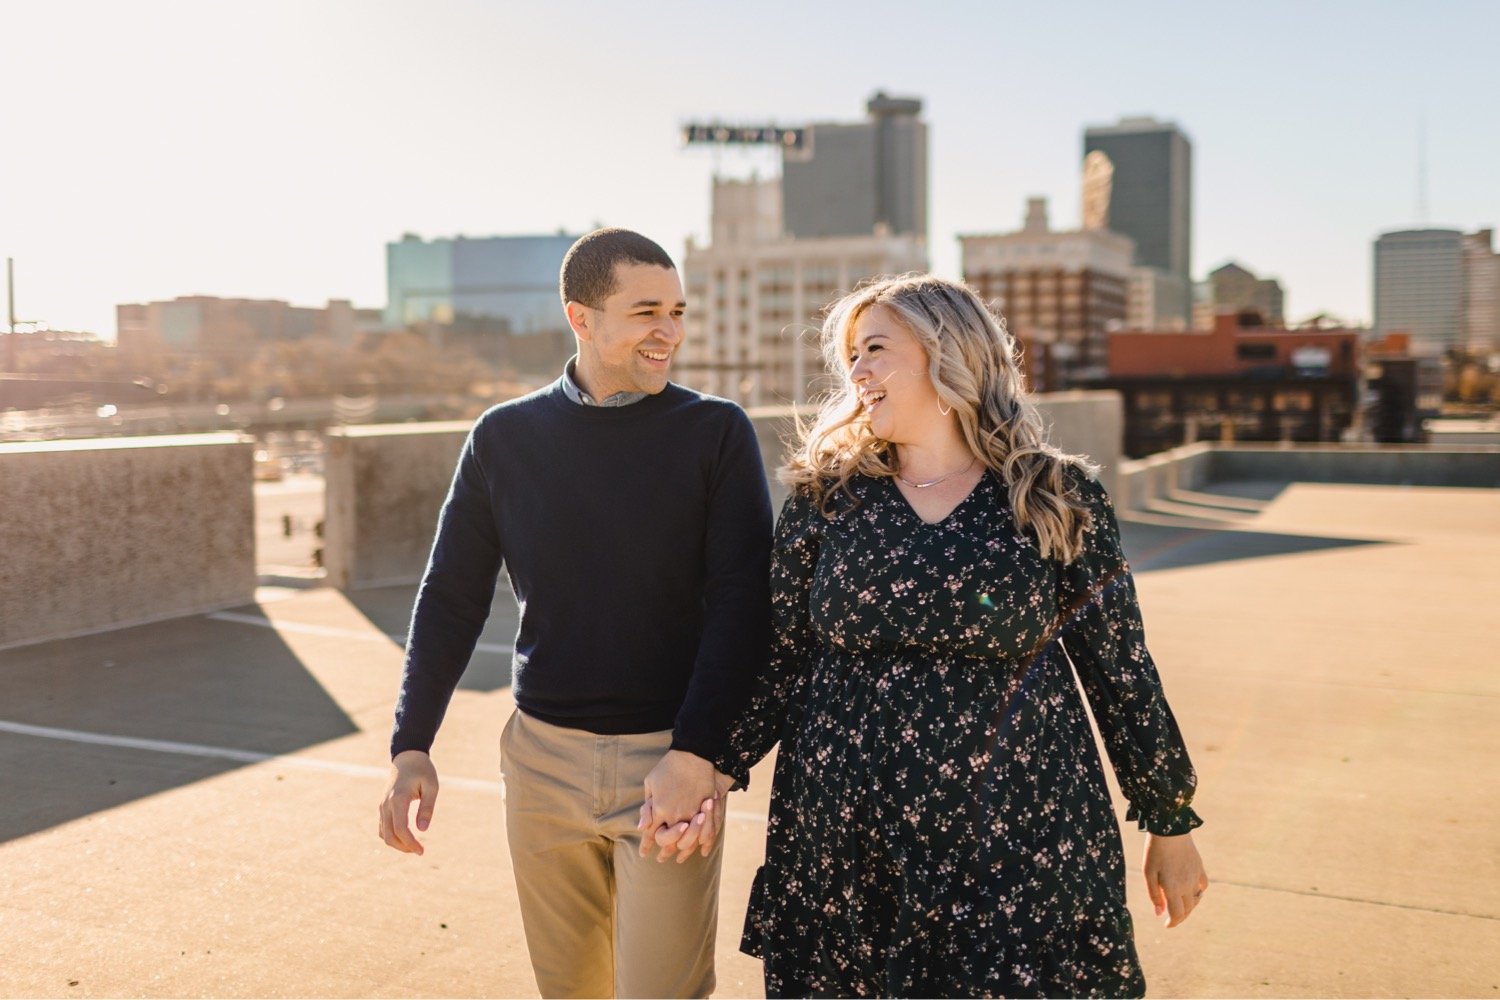 05_Brandi&Ronaldo-39_Kansas-City-Engagement-at-the-Crossroads-District-and-Snooze-AM-Eatery-Kelsey-Diane-Photography.jpg